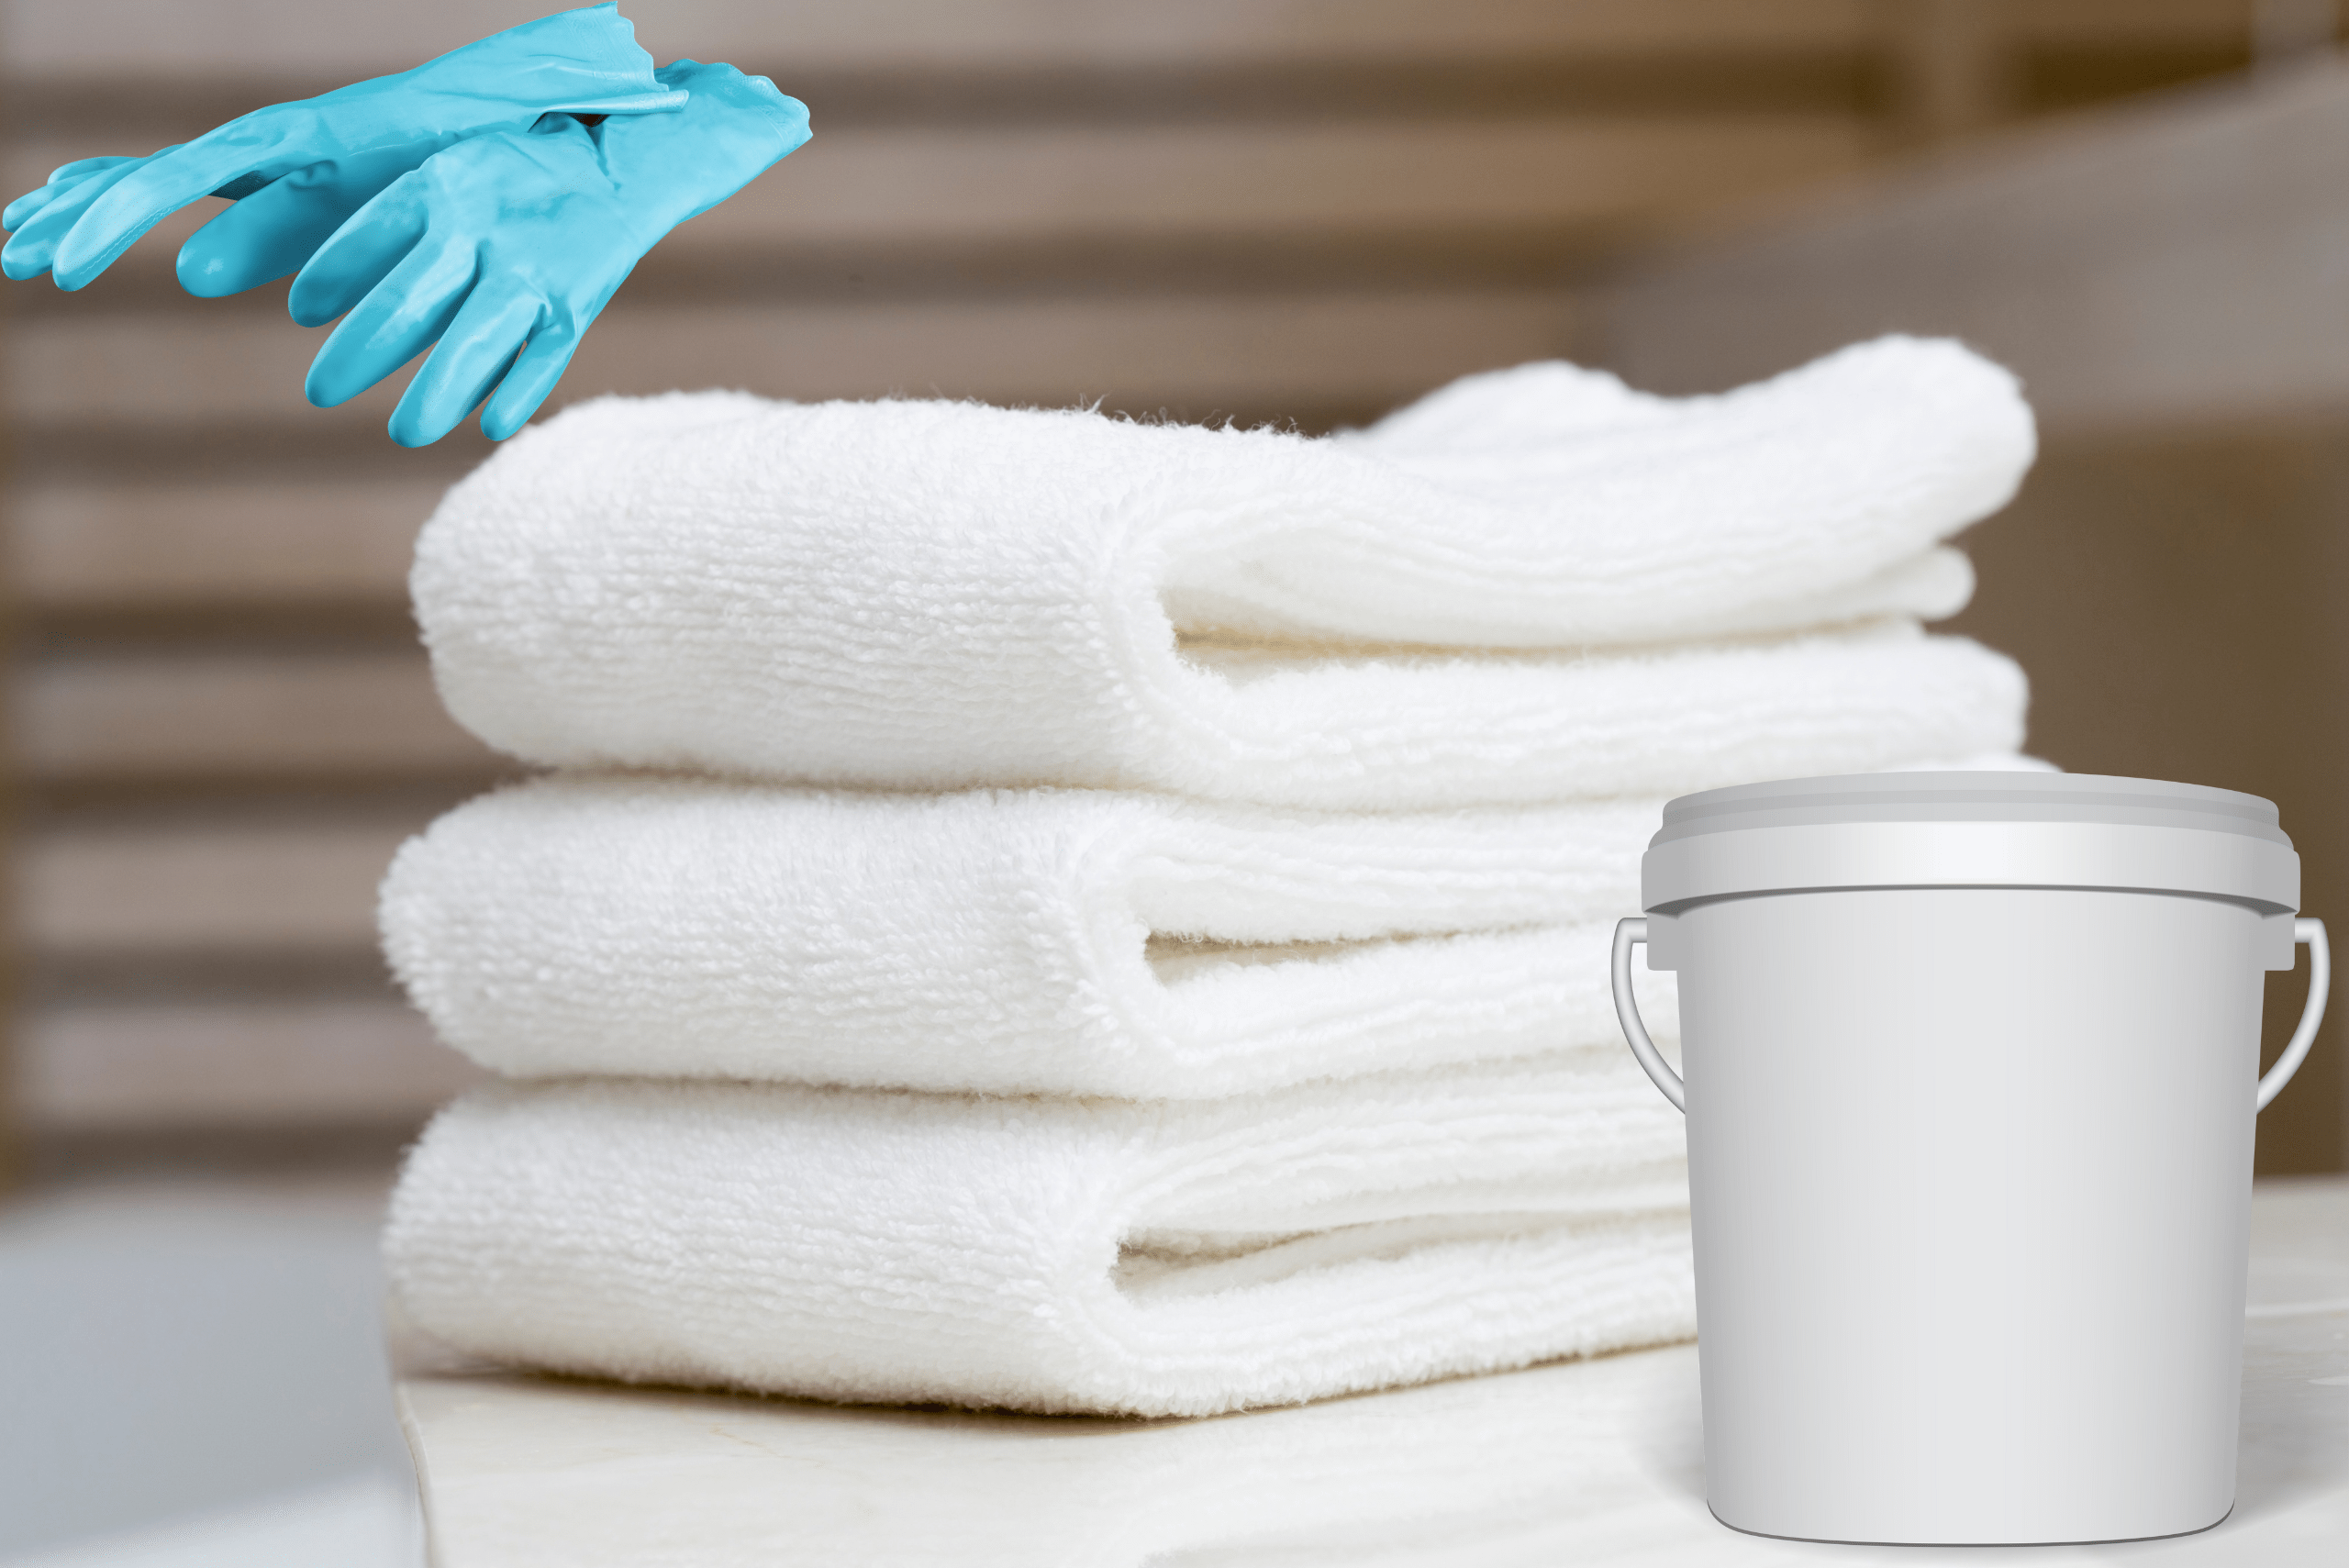 A stack of towels with overlay of rubber gloves and white bucket.